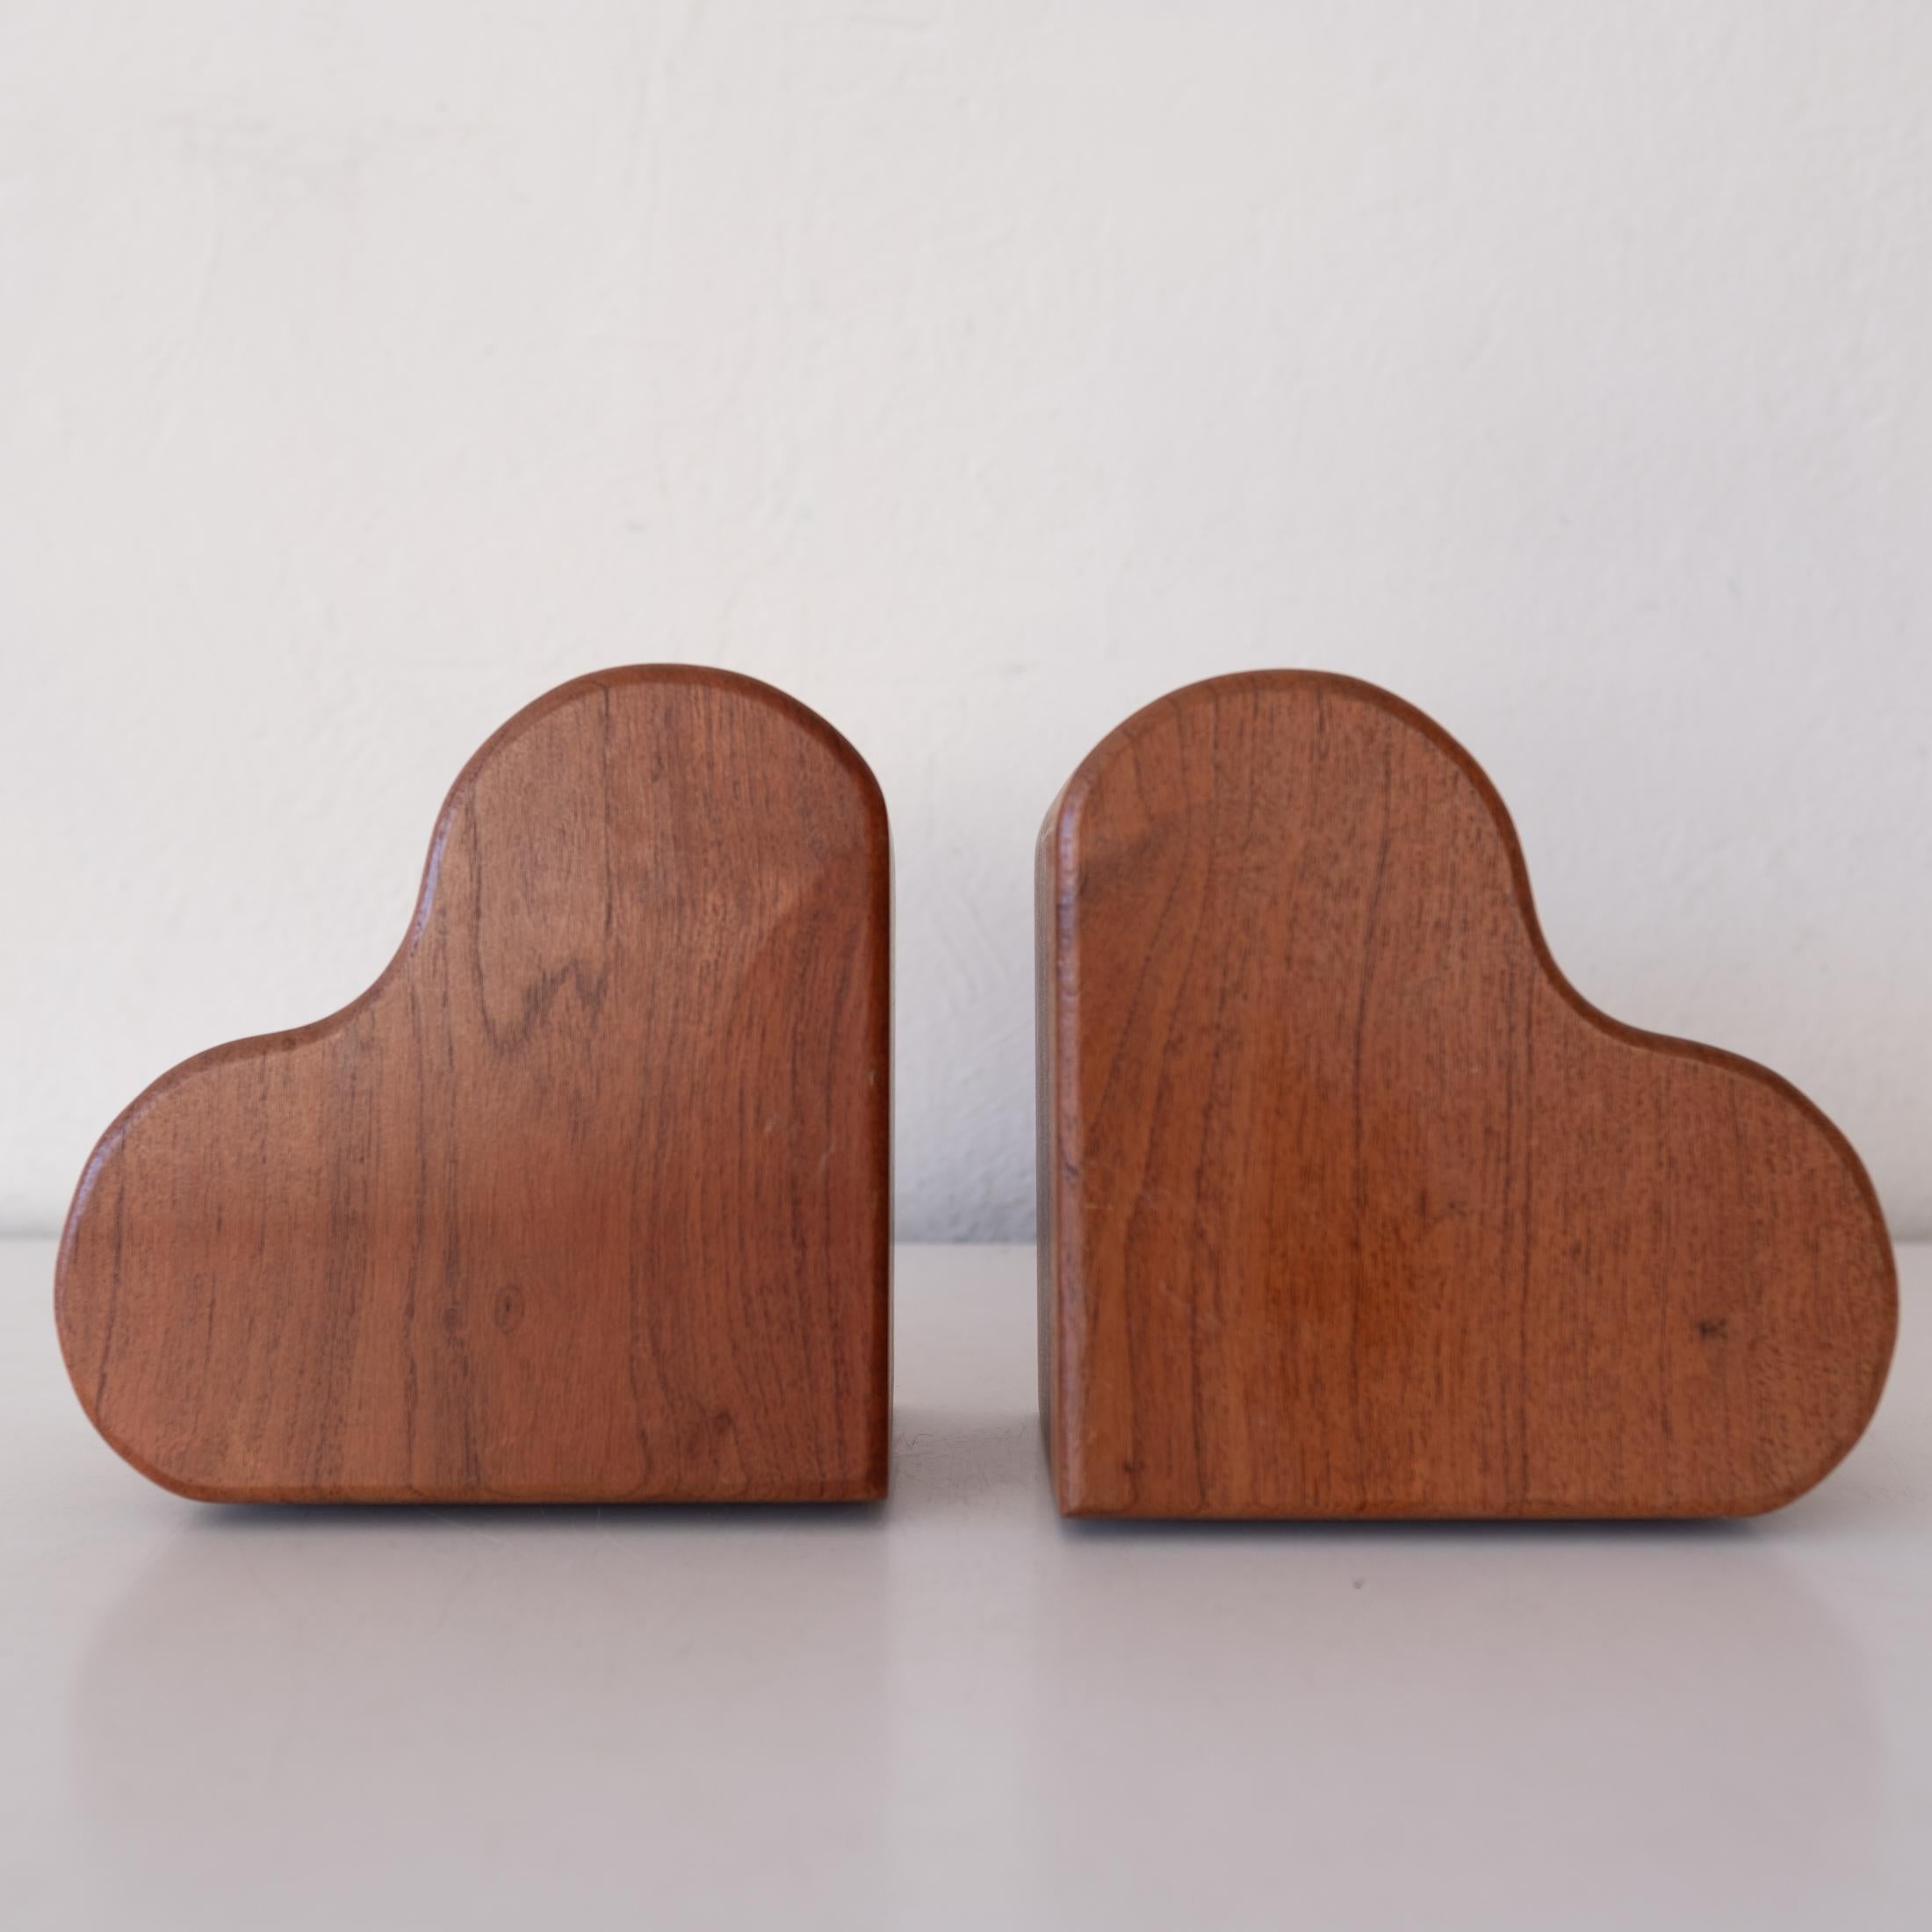 Sweet pair of Studio Crafted Wood Heart Bookends for the book lover in your life. Solid carved wood. 
